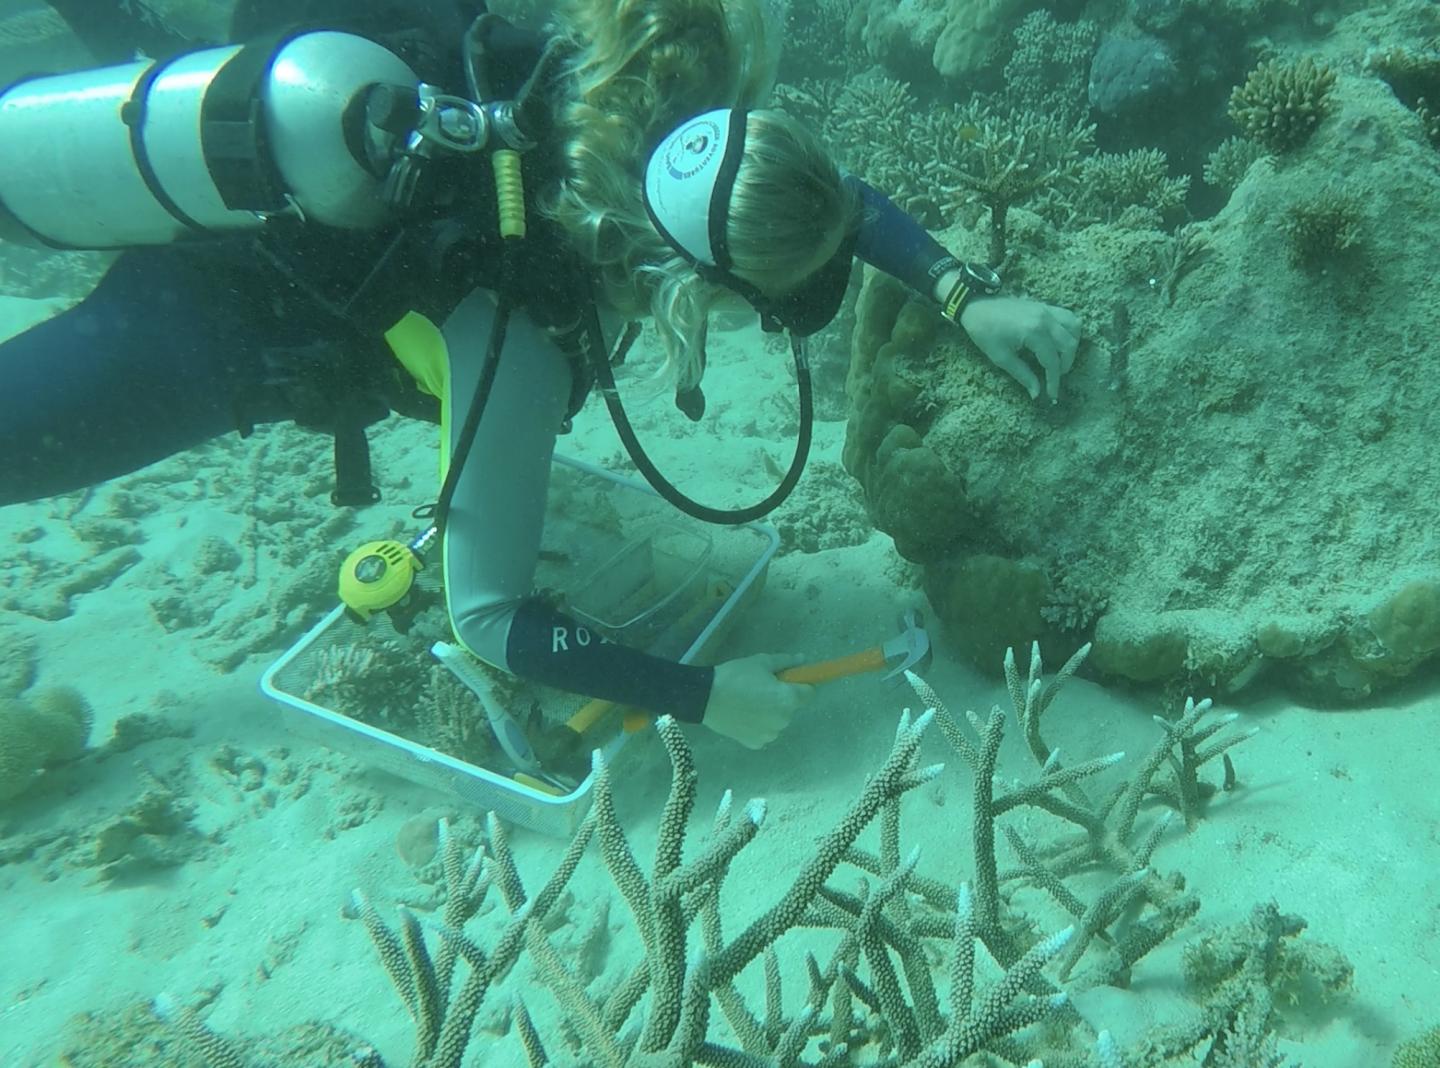 Coral Nuture Program on Australia's Great Barrier Reef